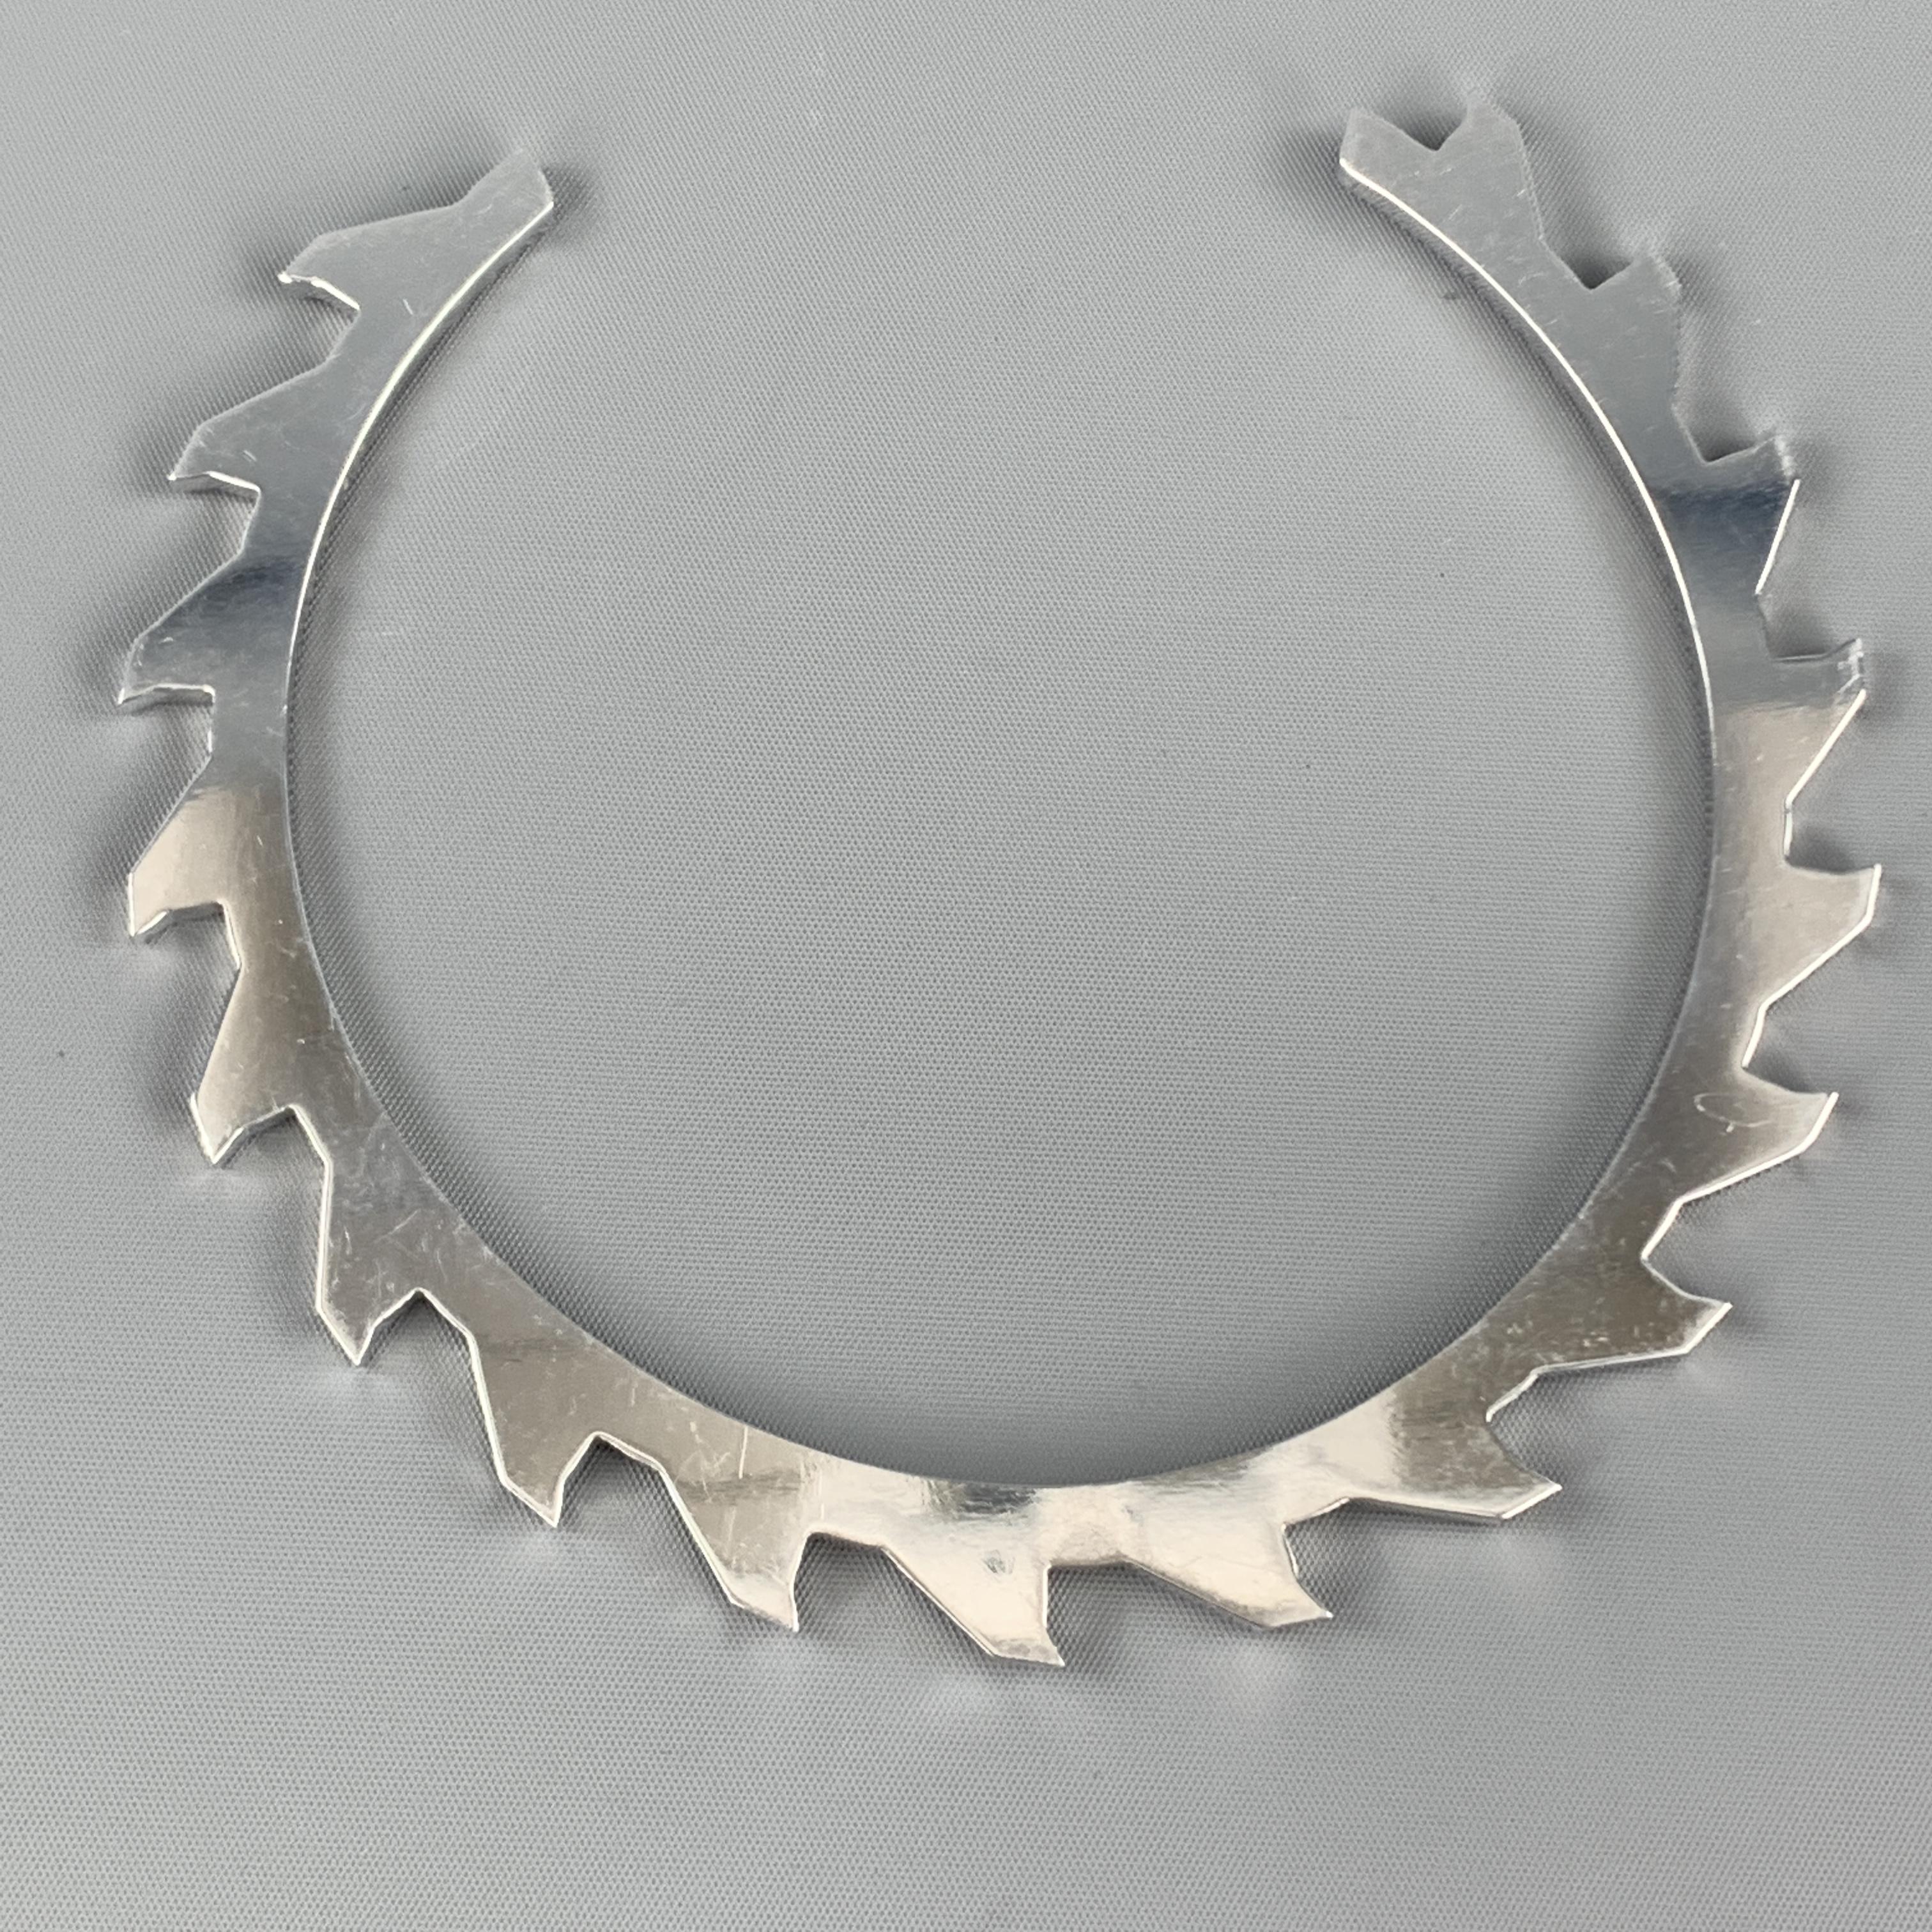 BOND HARDWARE NYC Buzzsaw Choker size small  comes in silver tone aluminum in a flat metal shape. Wear throughout. As-is.

Good Pre-Owned Condition.

Width: 0.5 in.
Fits: 14 in.